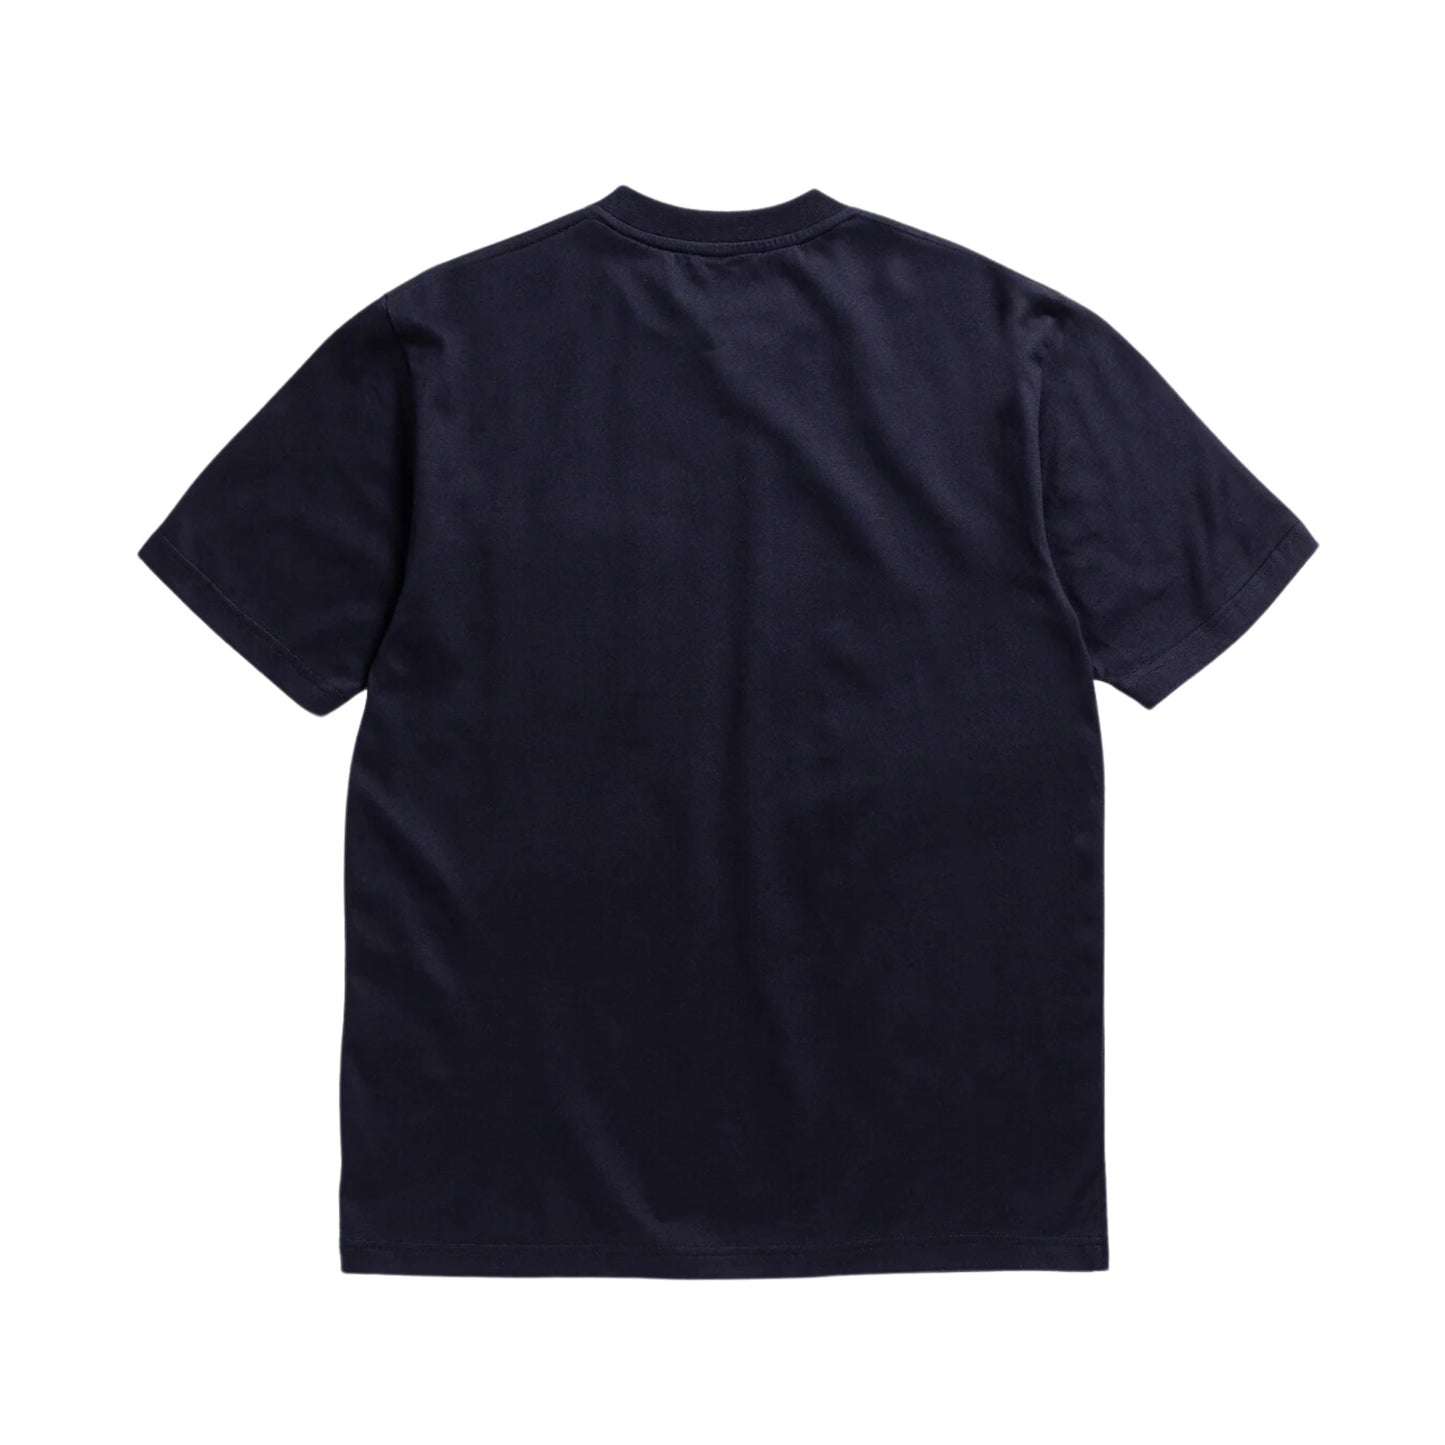 NORSE PROJECTS - Johannes Standard Pocket S/s